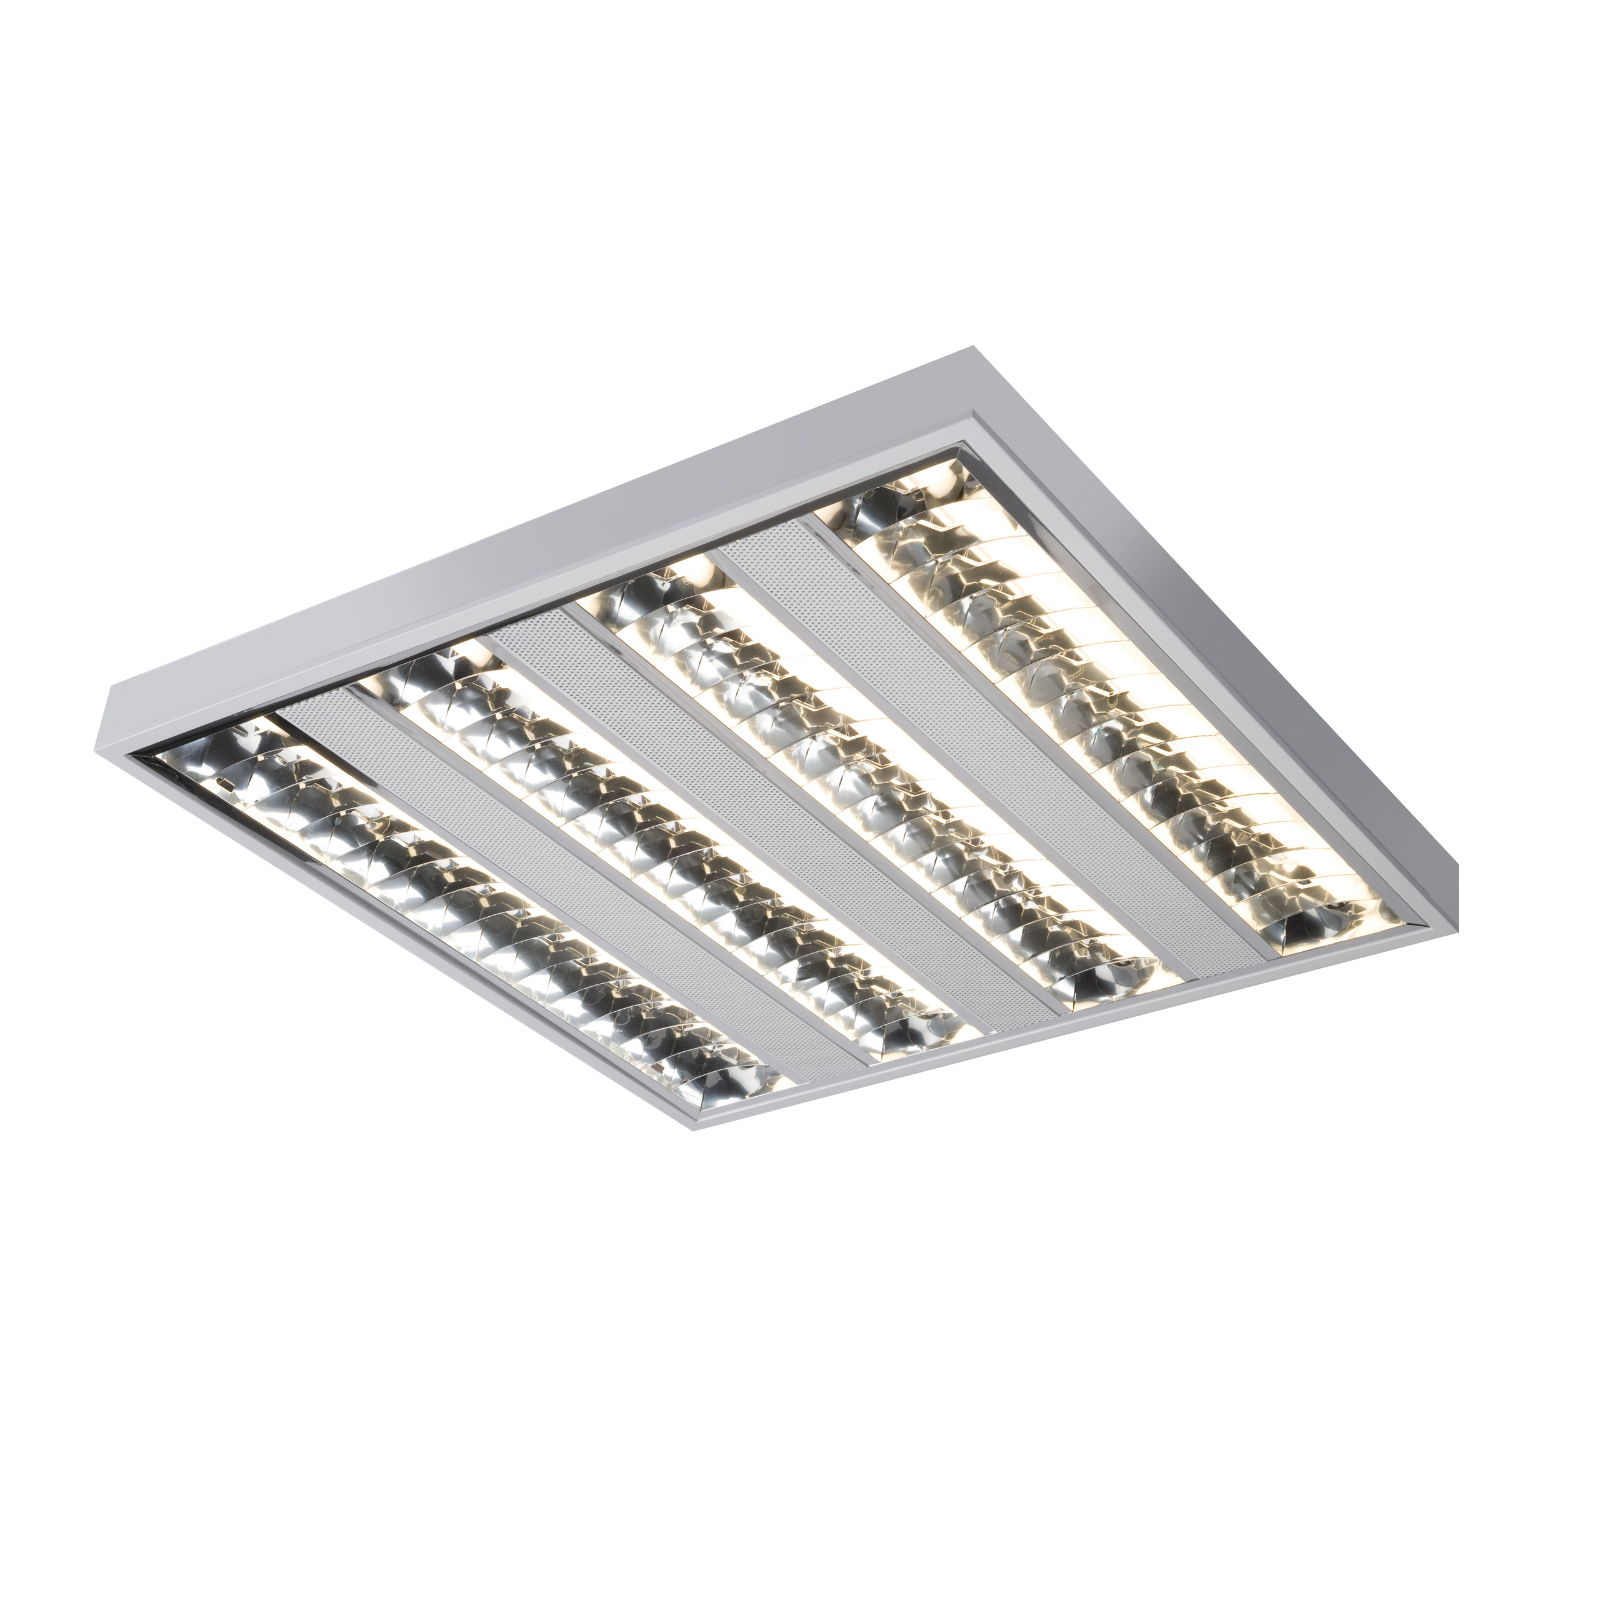 IP20 4x14W T8 Surface Mounted Emergency Fluorescent Fitting 600x600x75mm - SURF414EMHF 